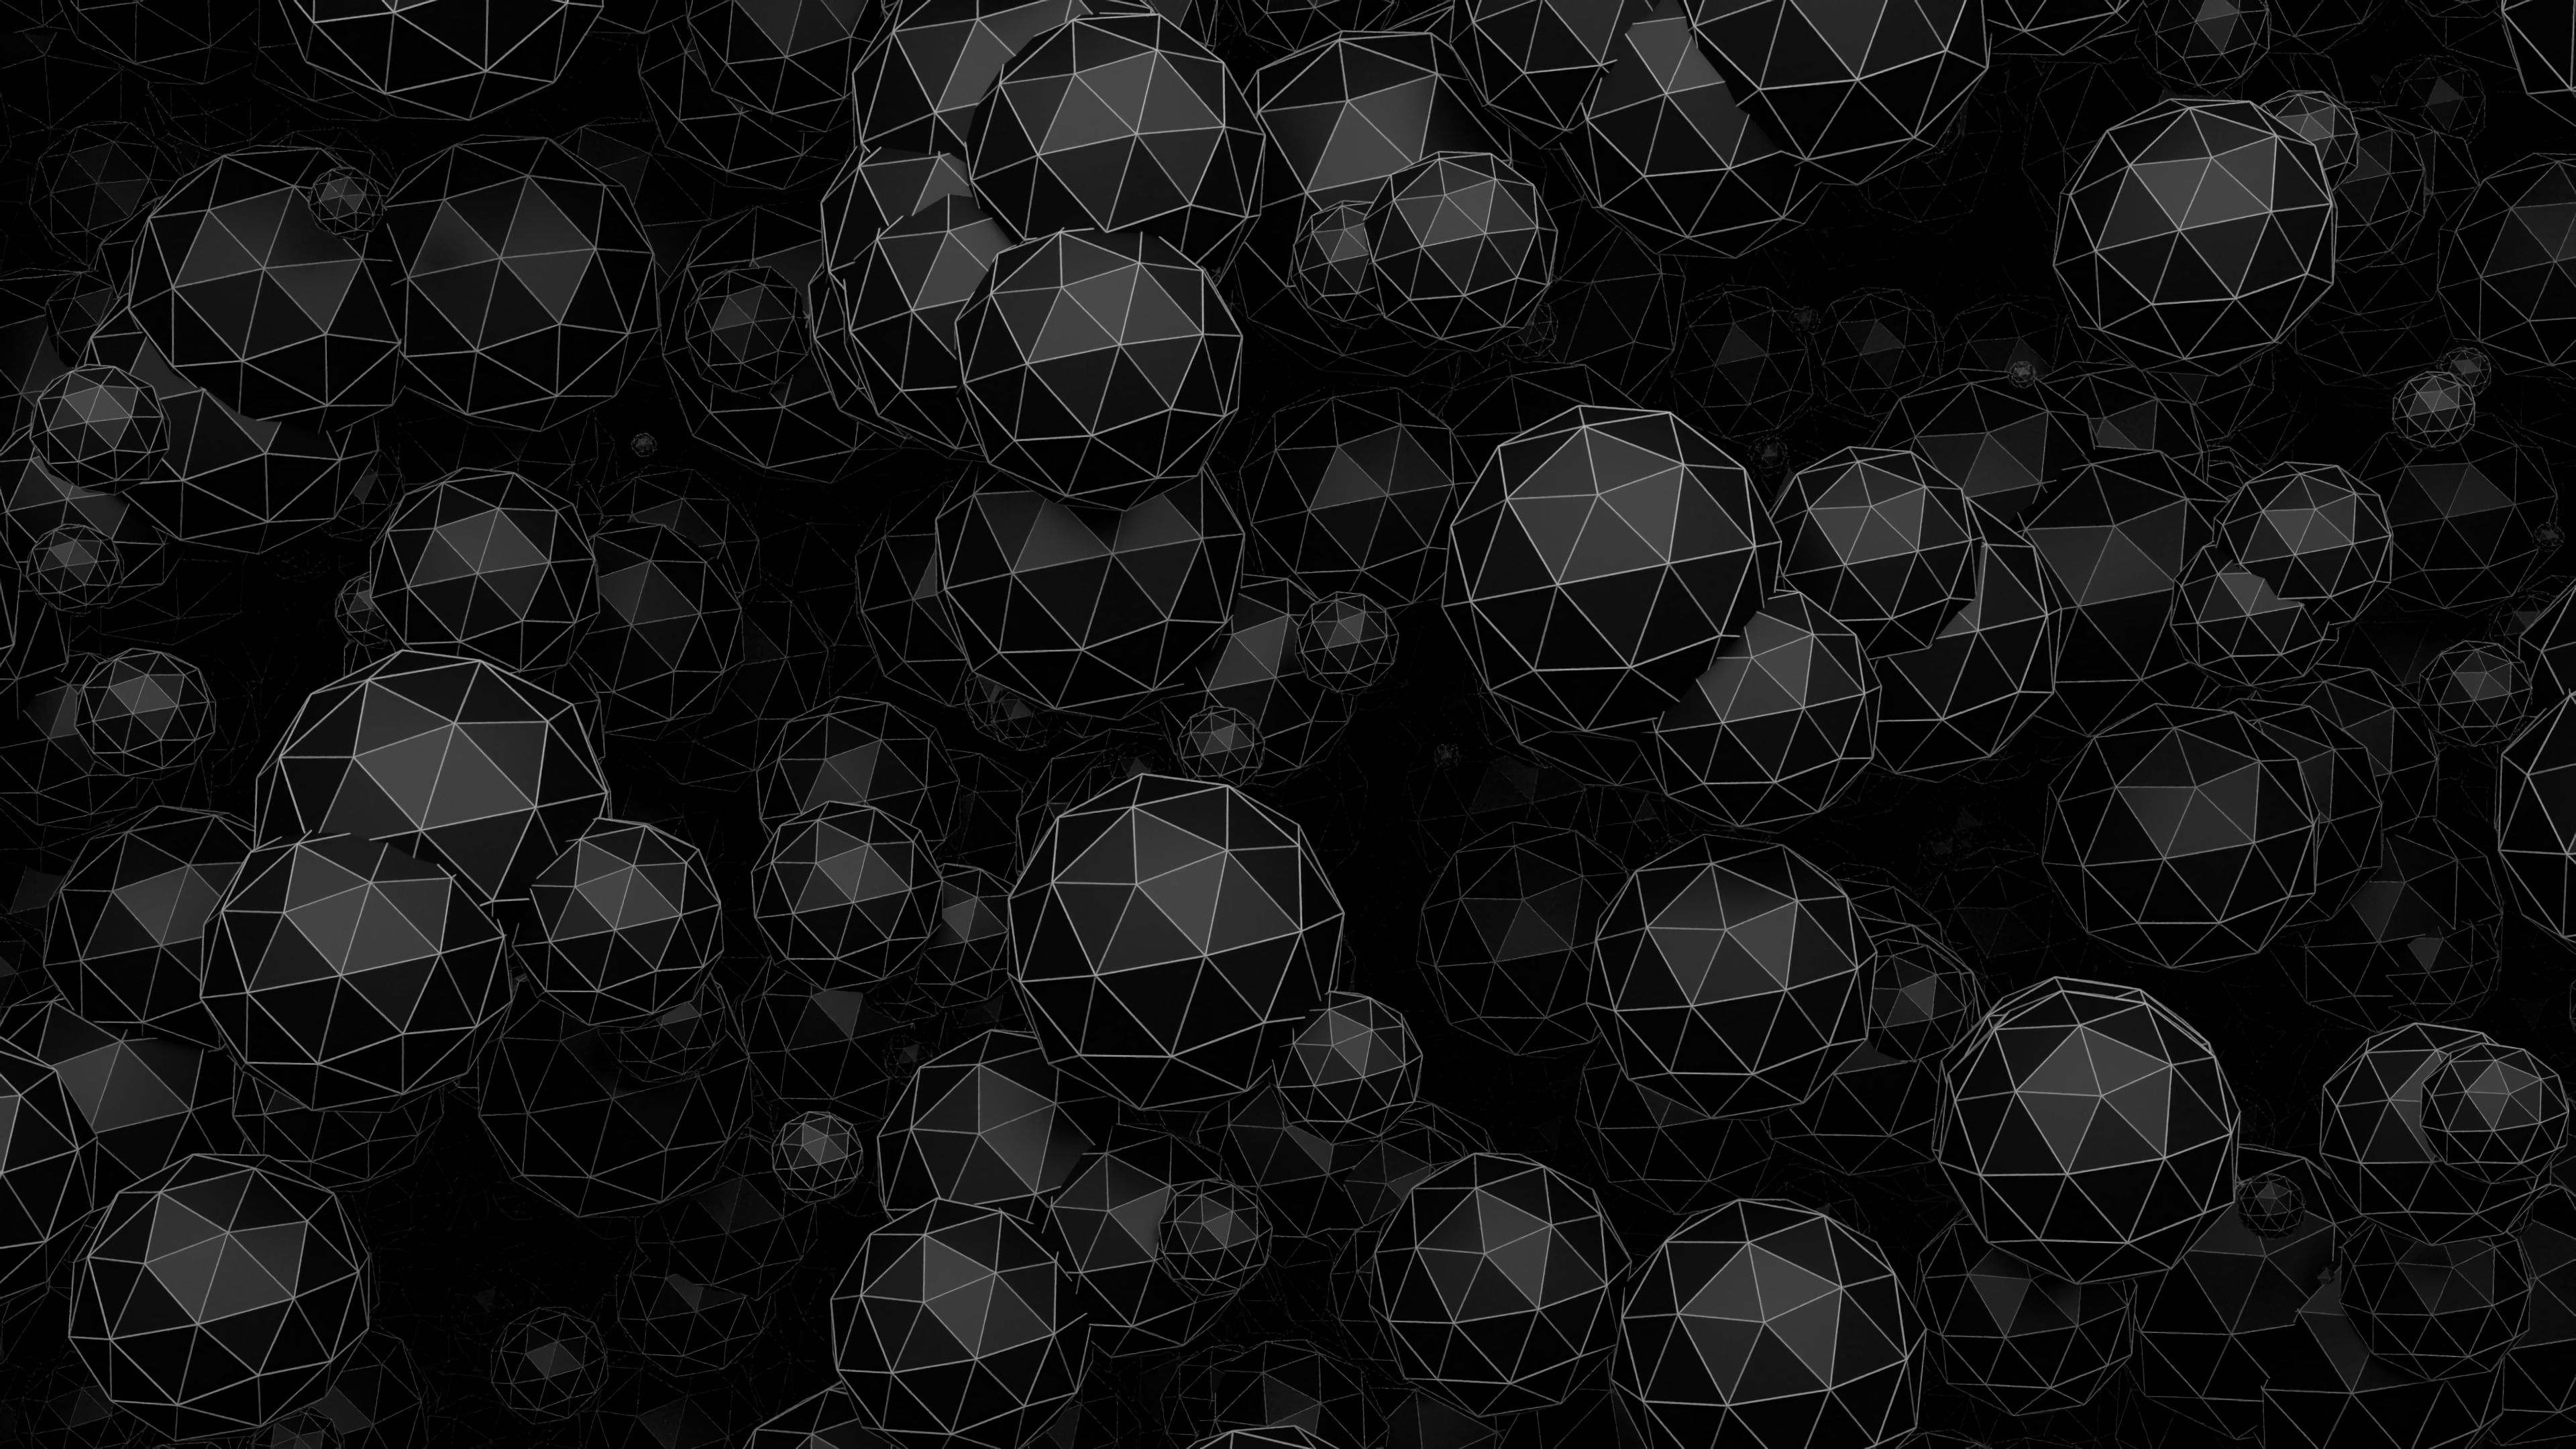 114150 free download Black wallpapers for phone, polyhedra, shapes, balls, multifaceted Black images and screensavers for mobile